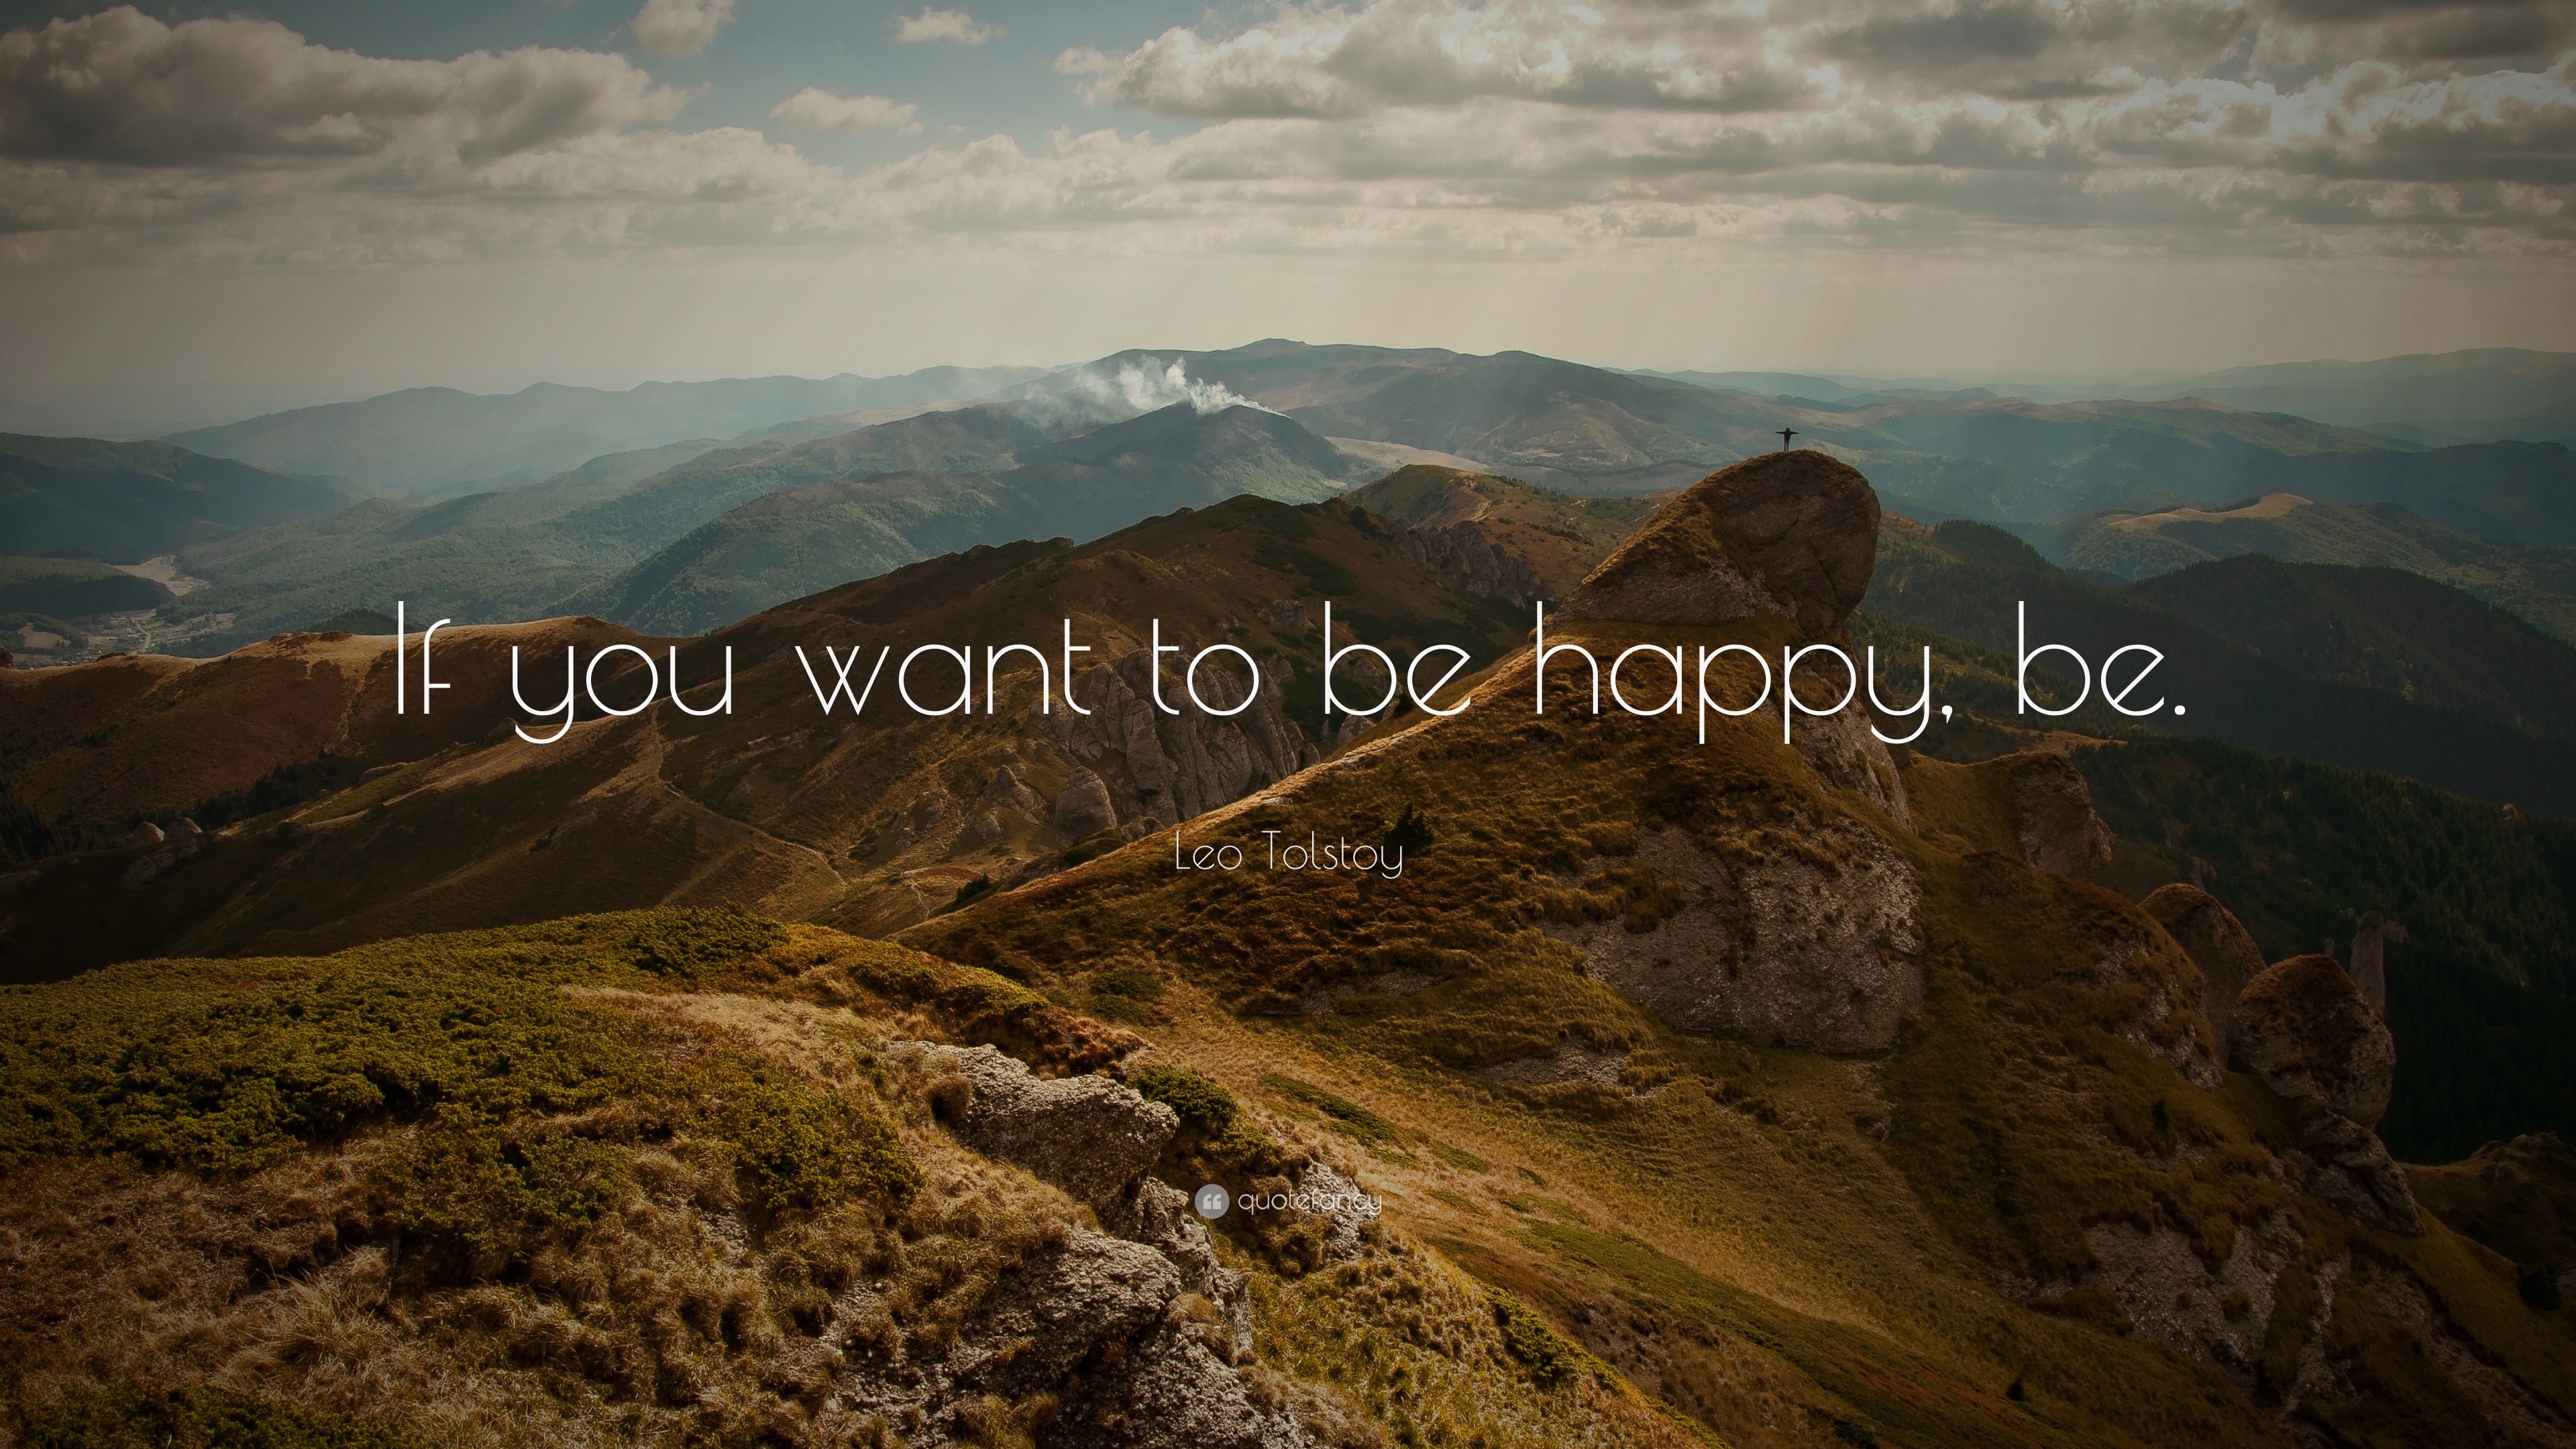 Leo Tolstoy Quote If You Want To Be Happy Be